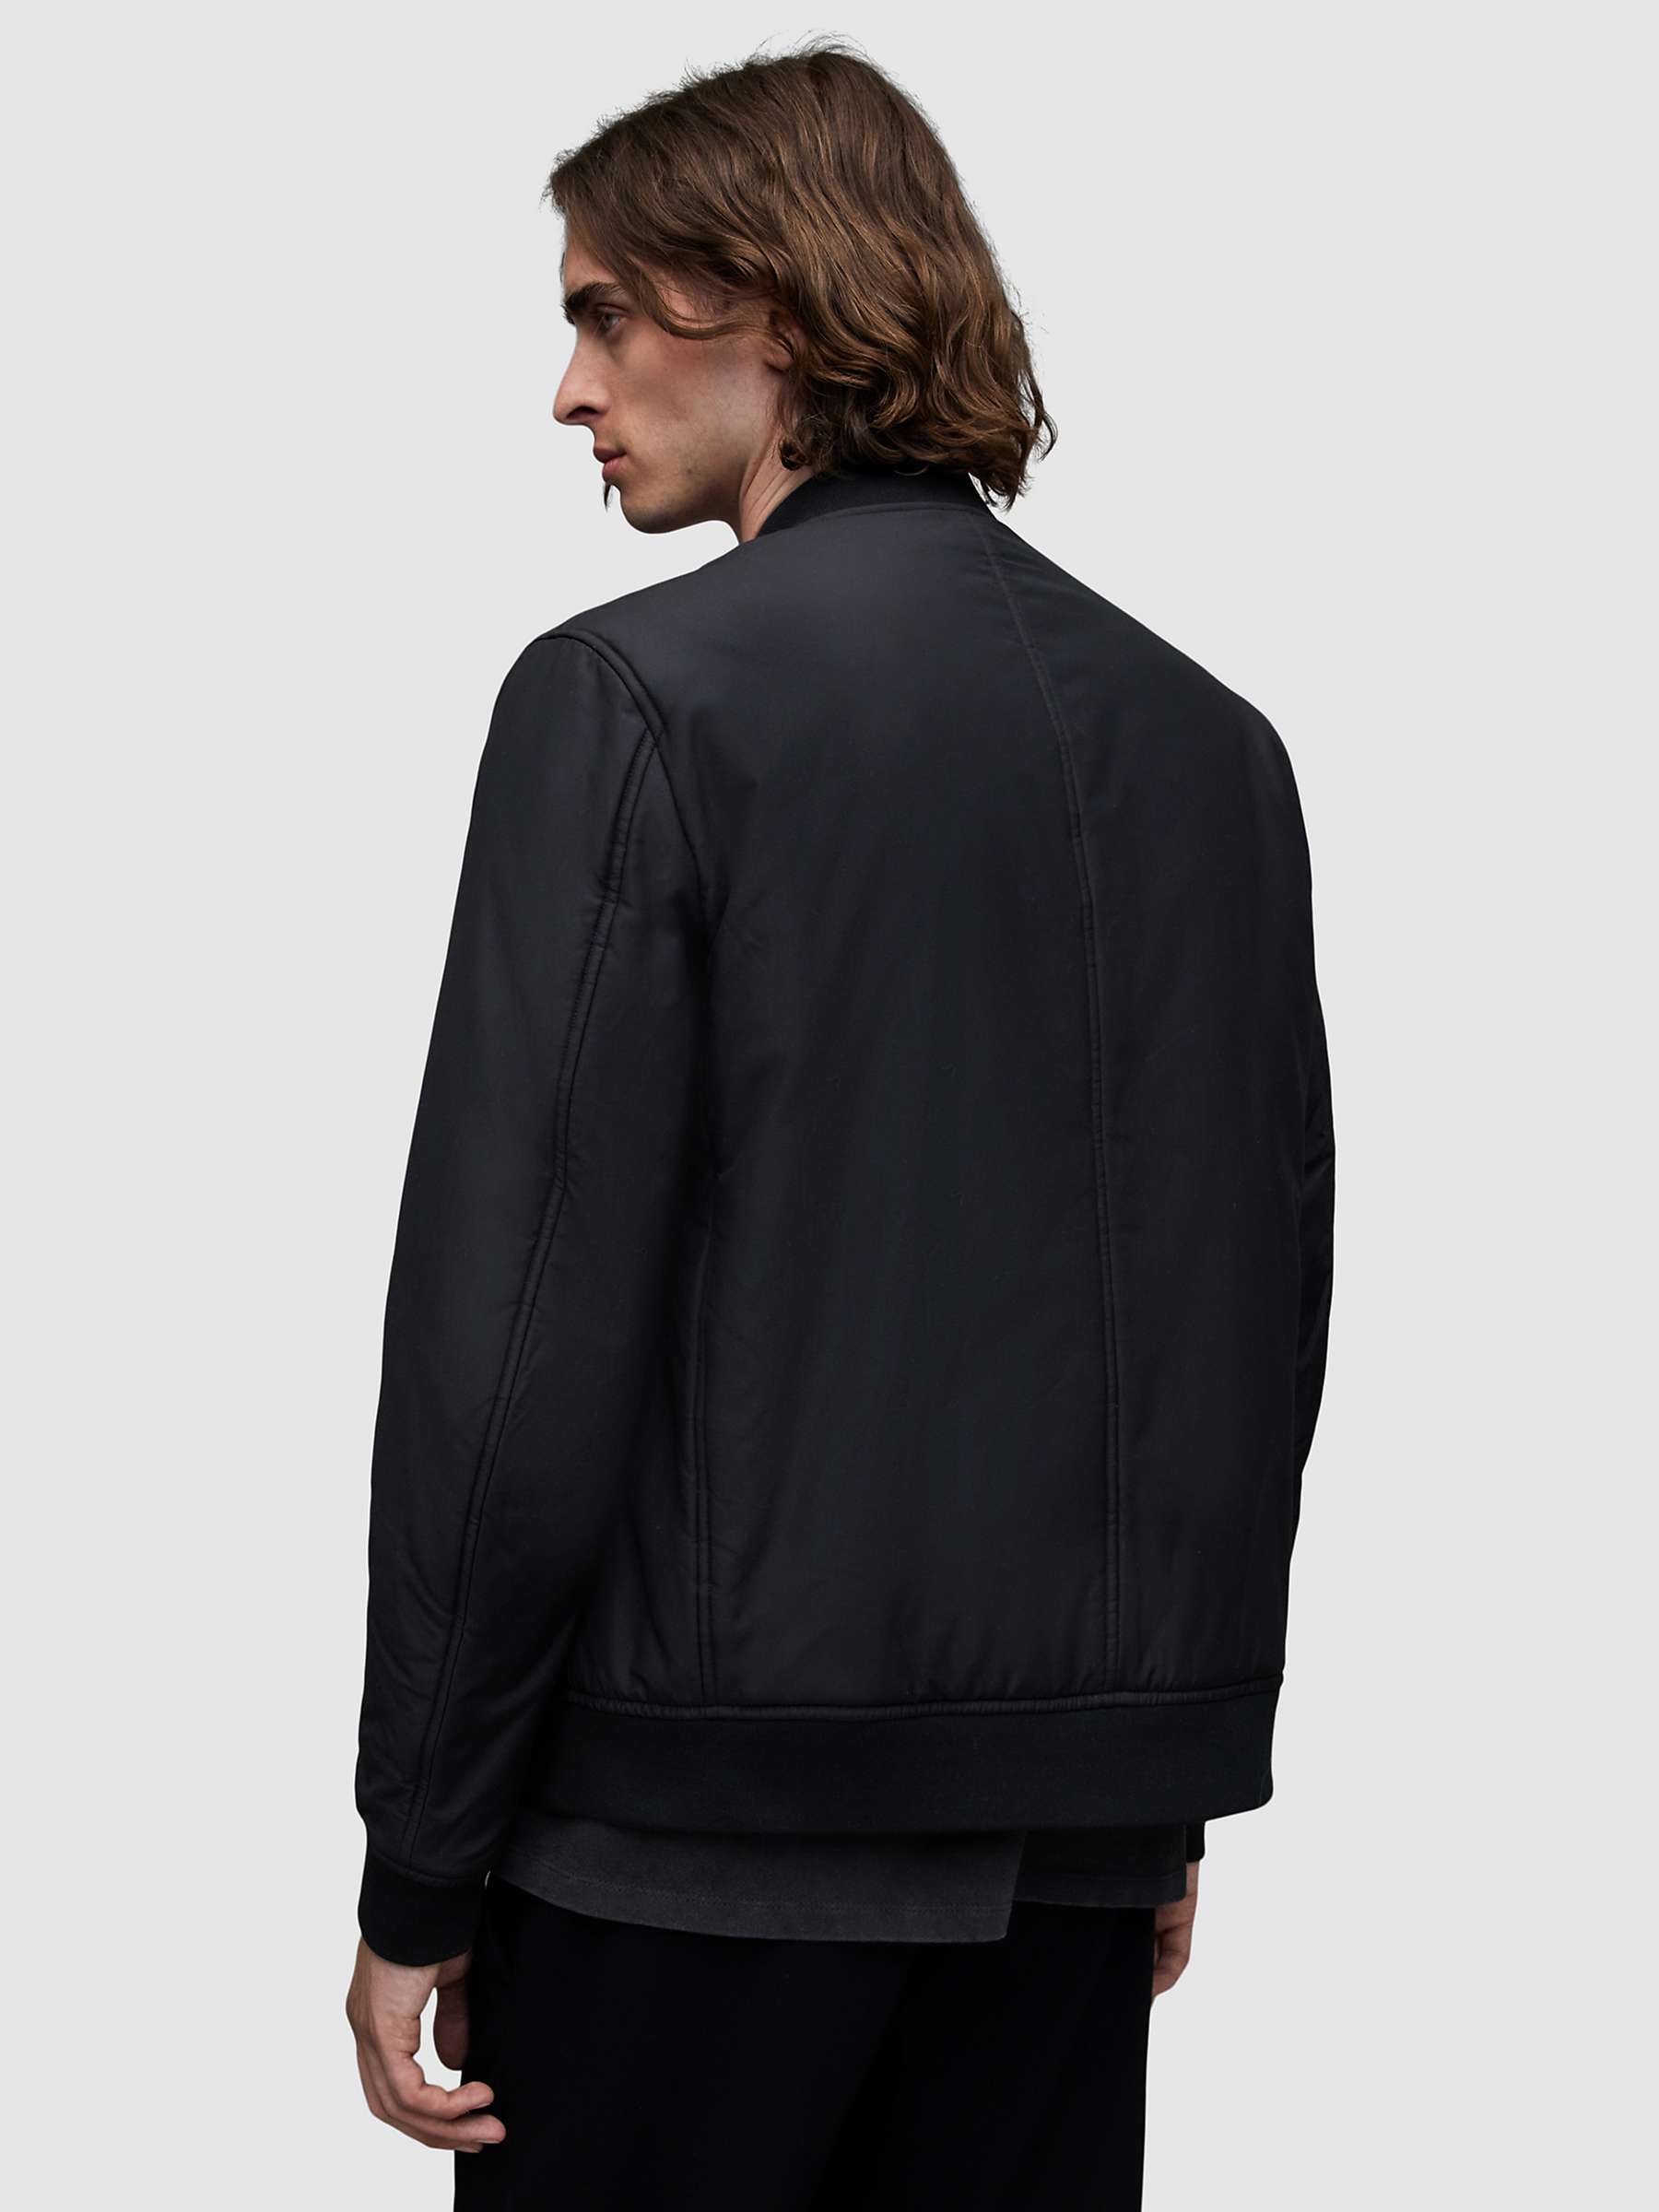 Buy AllSaints Withrow Bomber Jacket Online at johnlewis.com